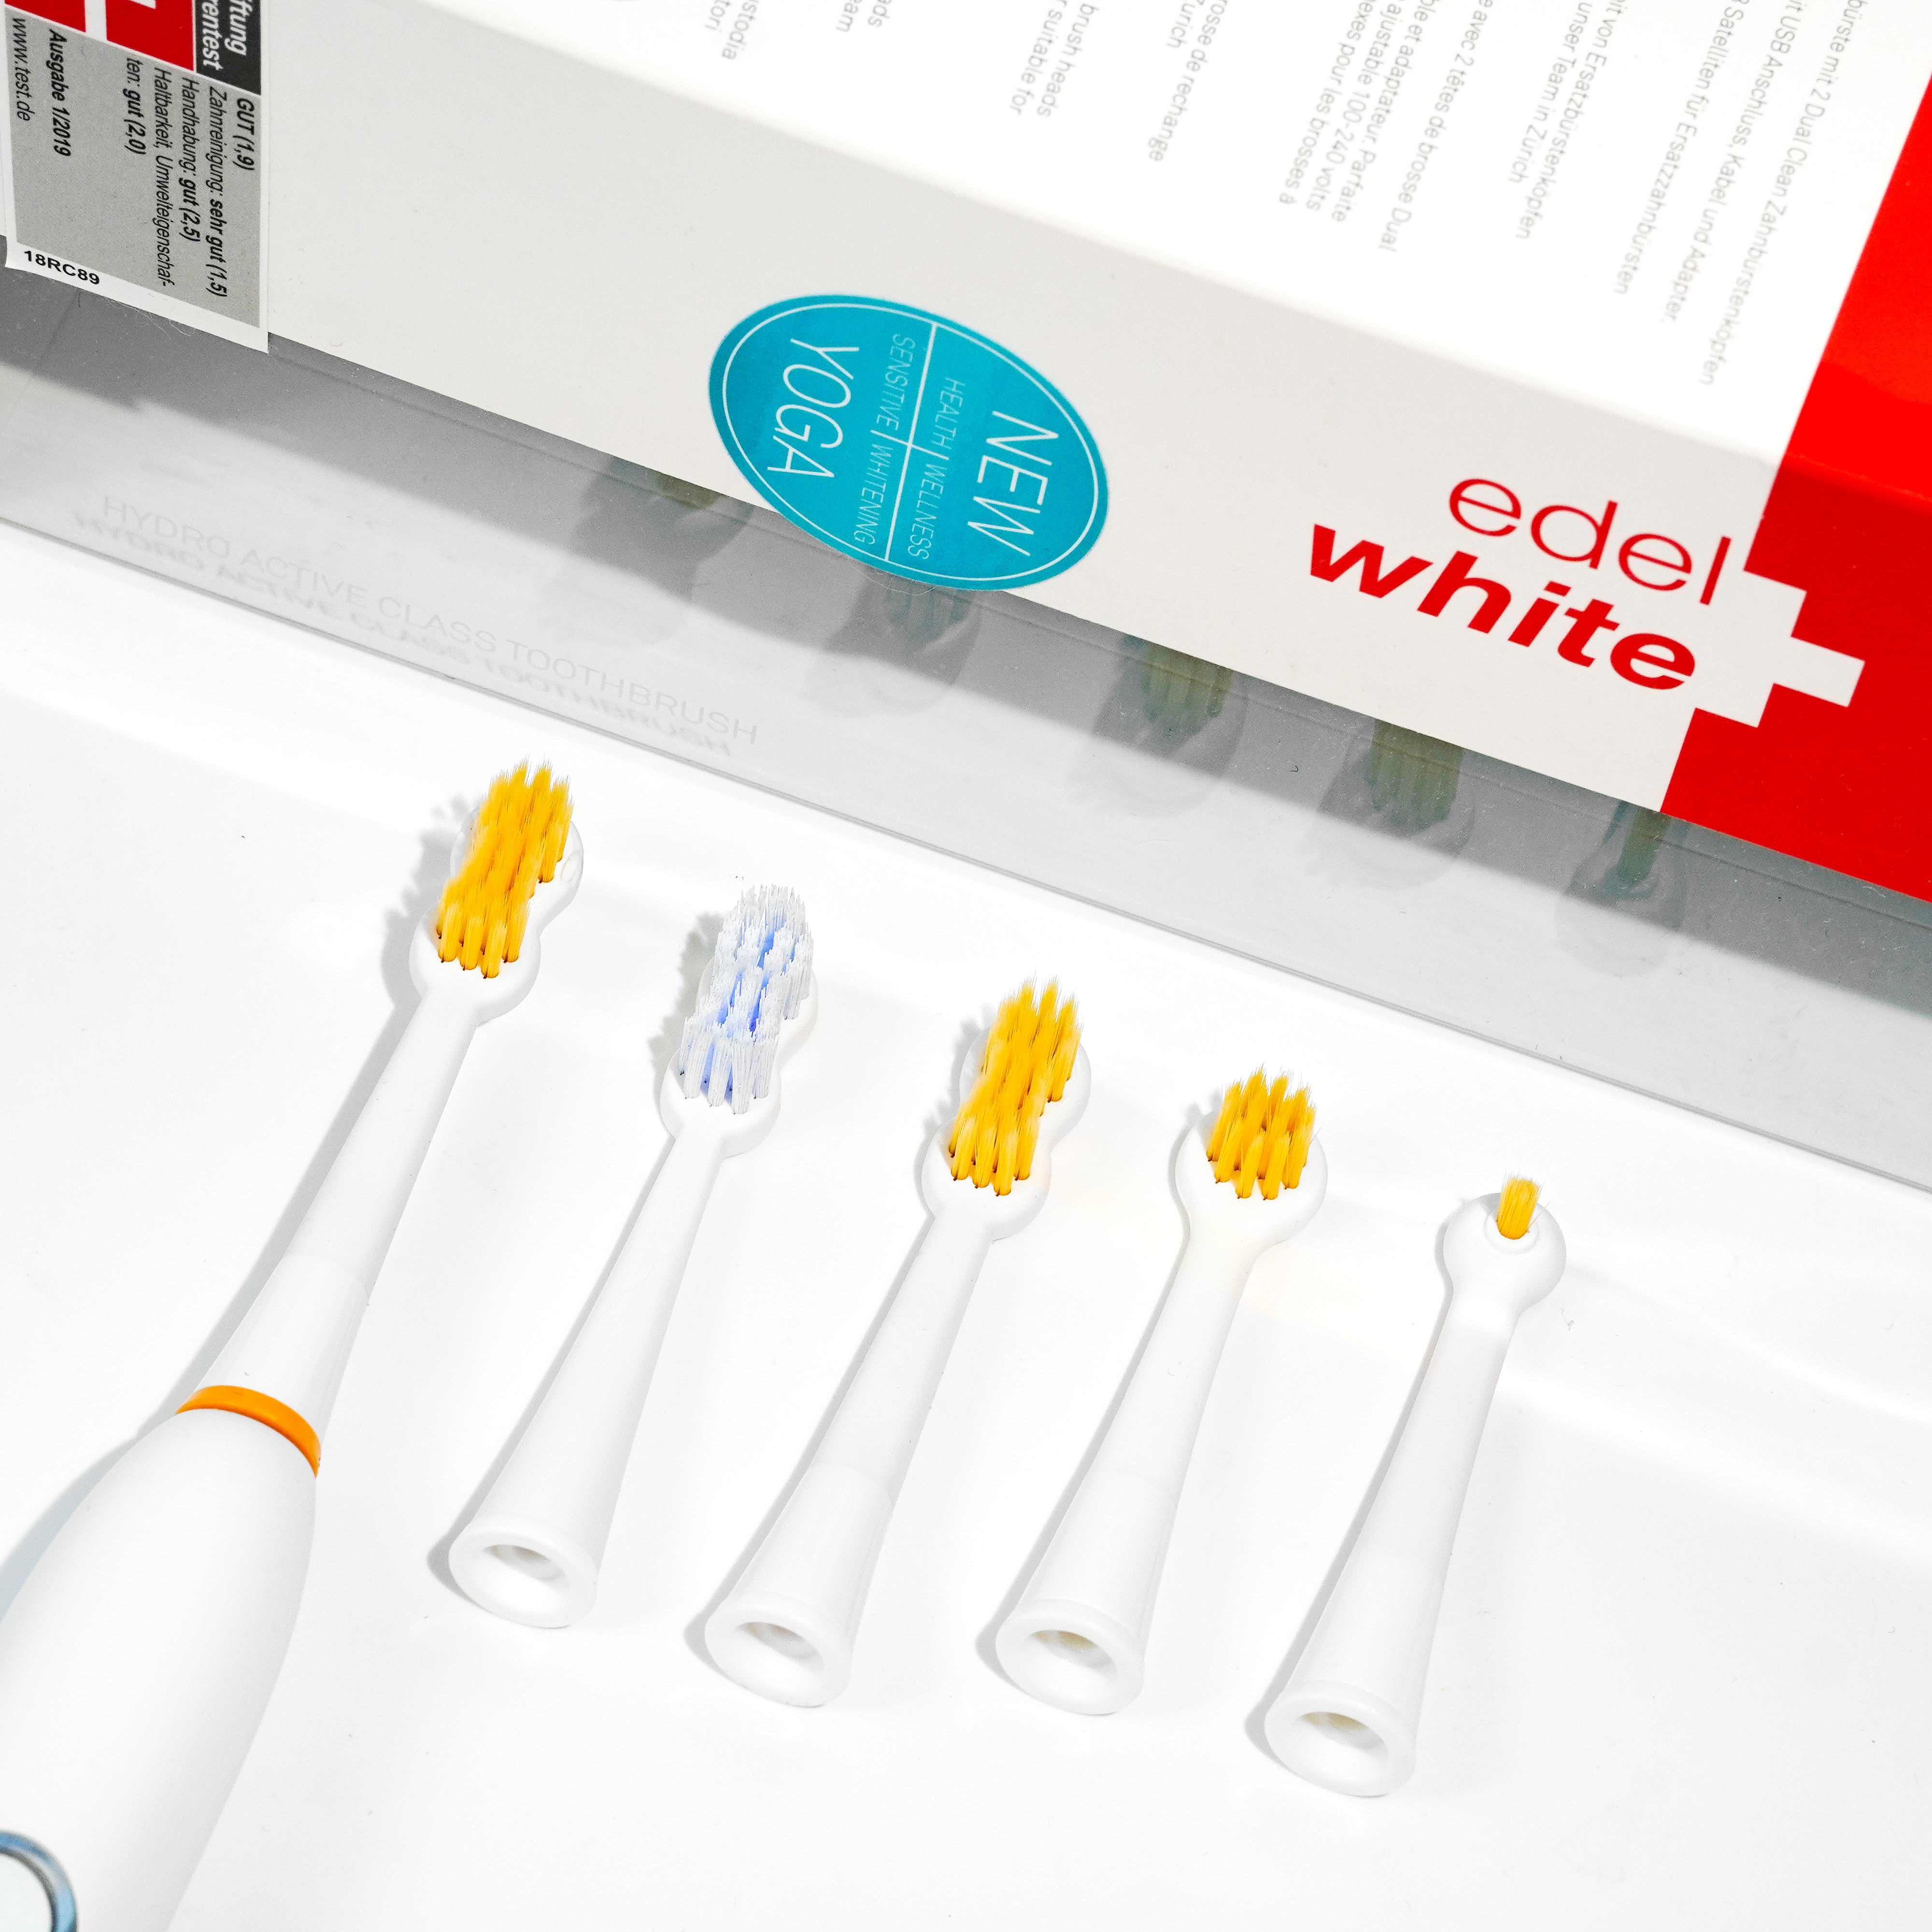 edel white hydrodynamic sonic toothbrush with UltraSoft brush heads